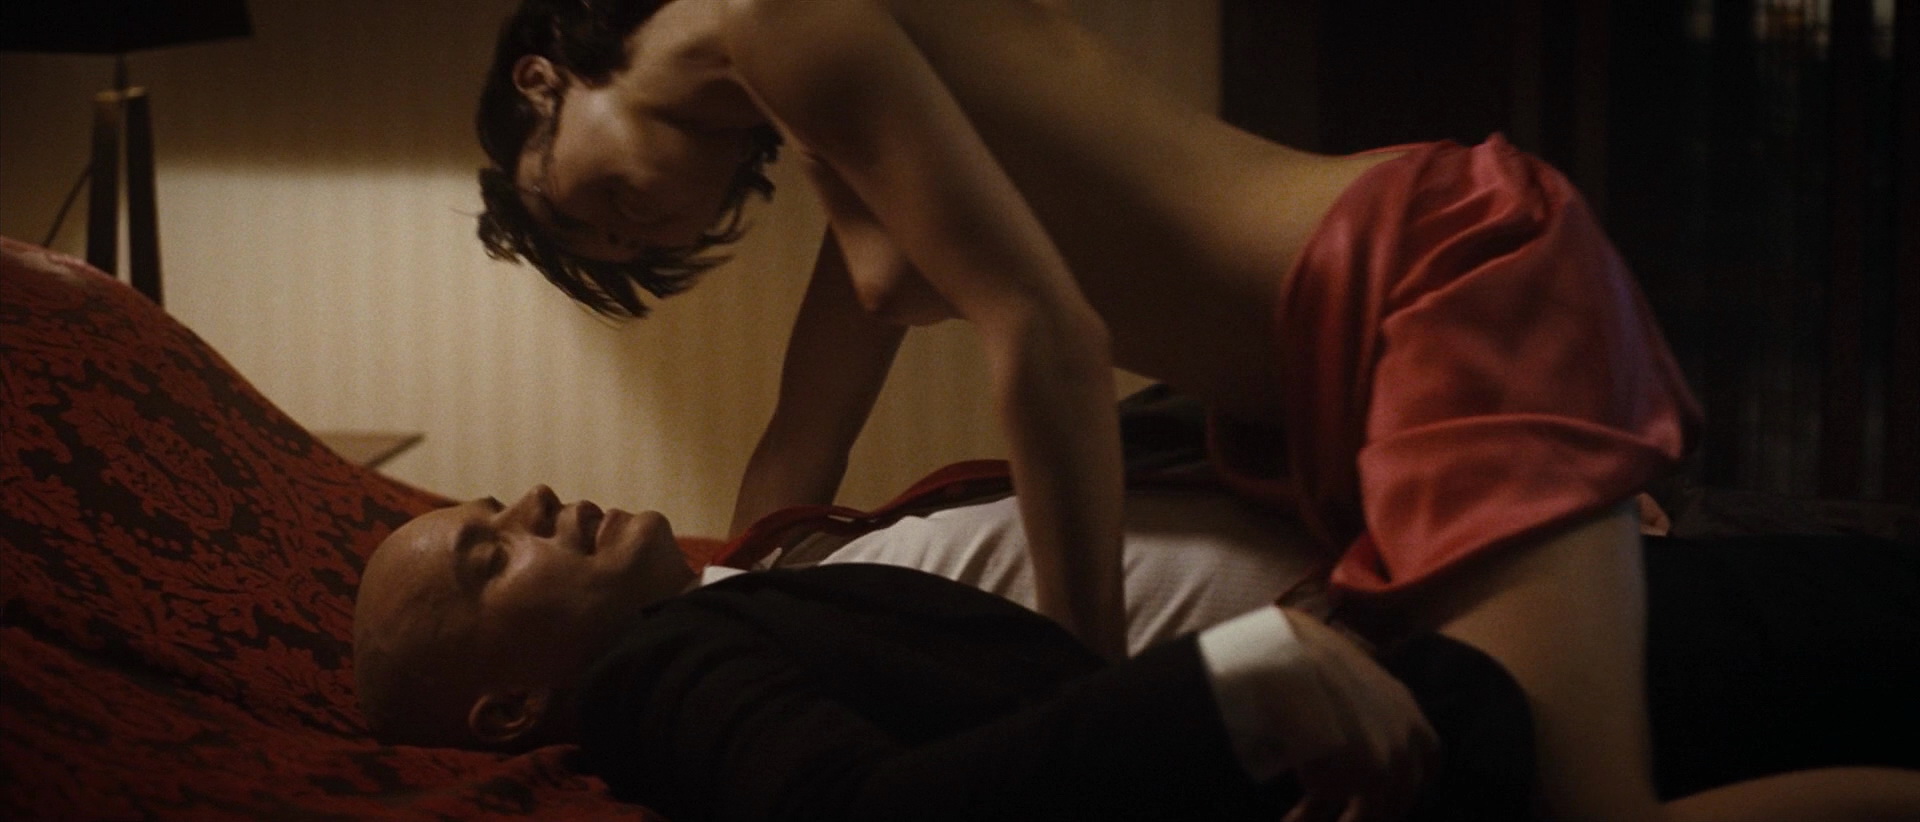 naughty, horny, topless and lovely sexy Olga Kurylenko climbs on top of a lucky guy and seduces him for some steaming hot and naughty adventures! Lucky bastard...